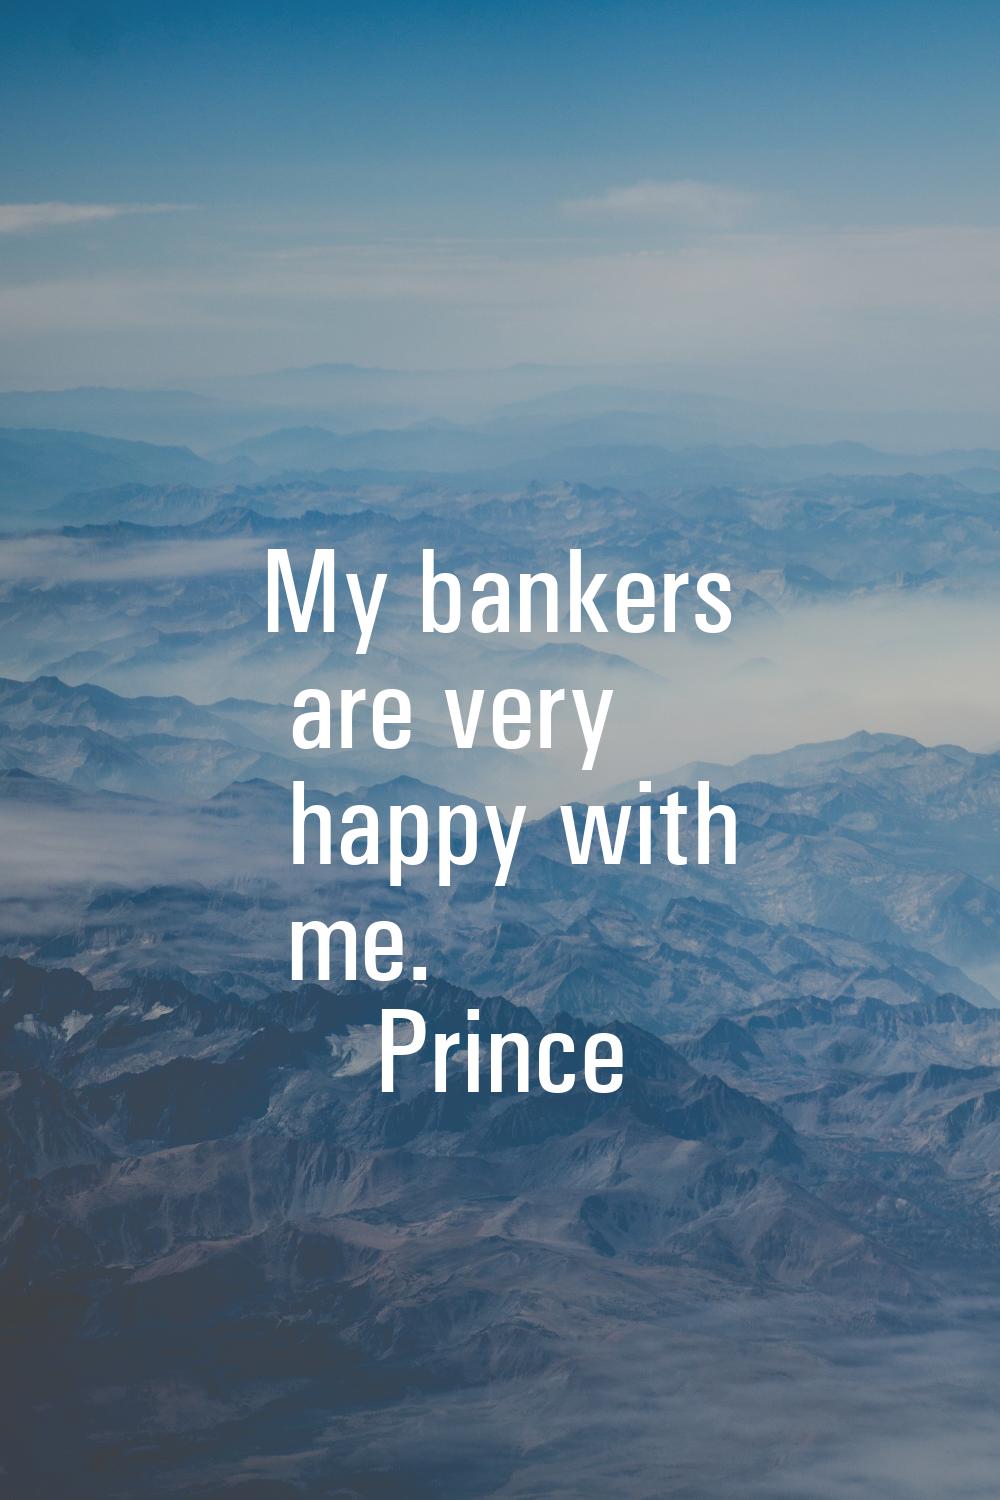 My bankers are very happy with me.